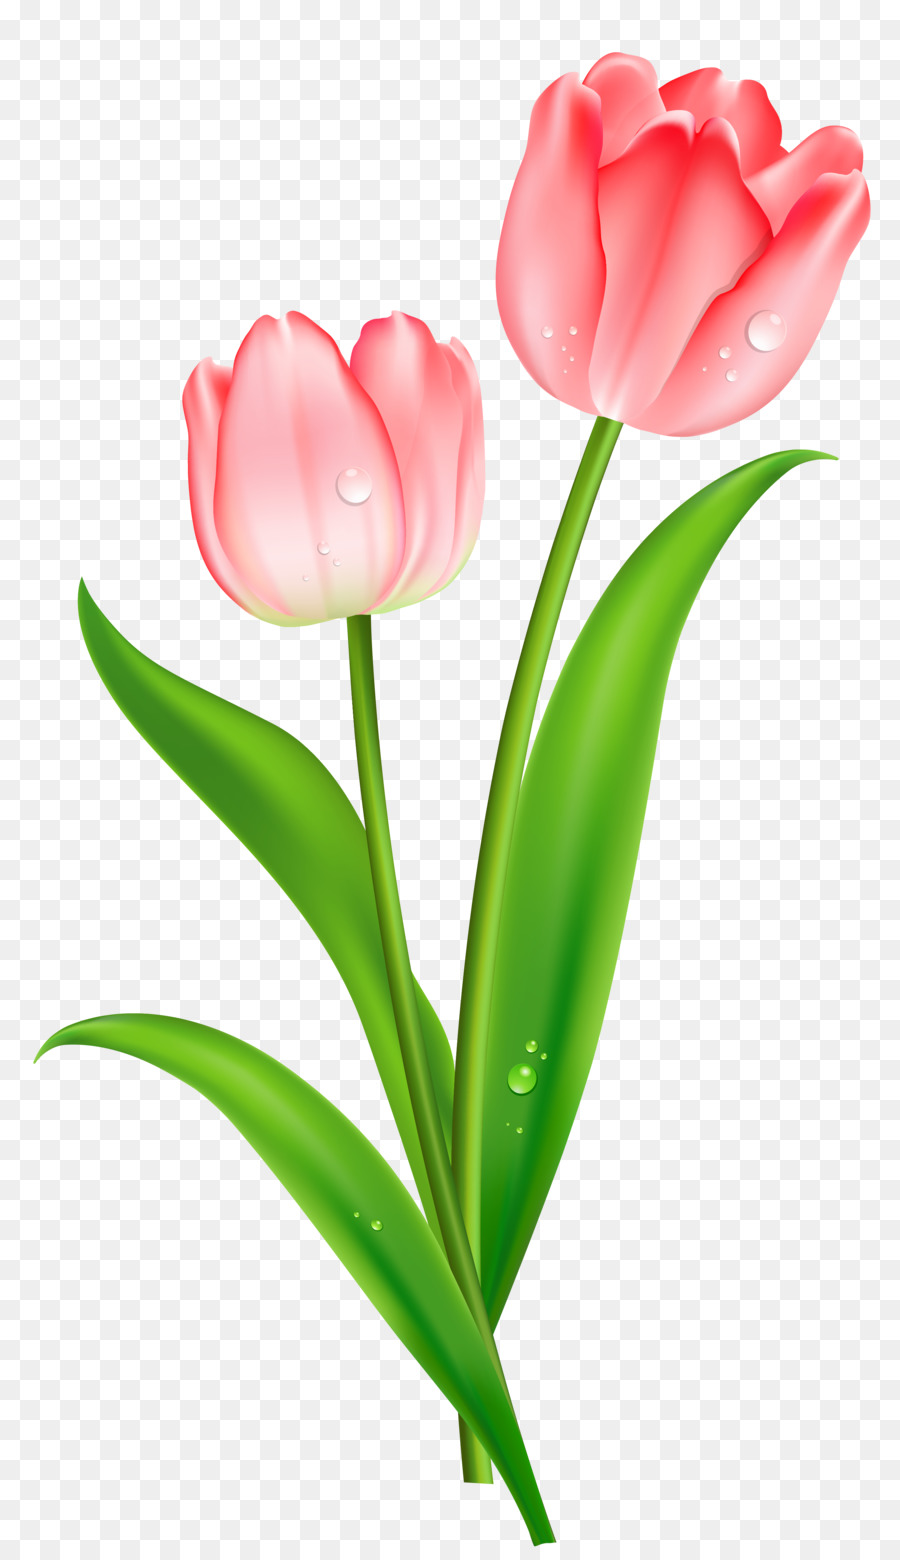 Tulip Flower Clip art - Tulip PNG Picture png download - 2586*4480 - Free Transparent Tulip png Download.